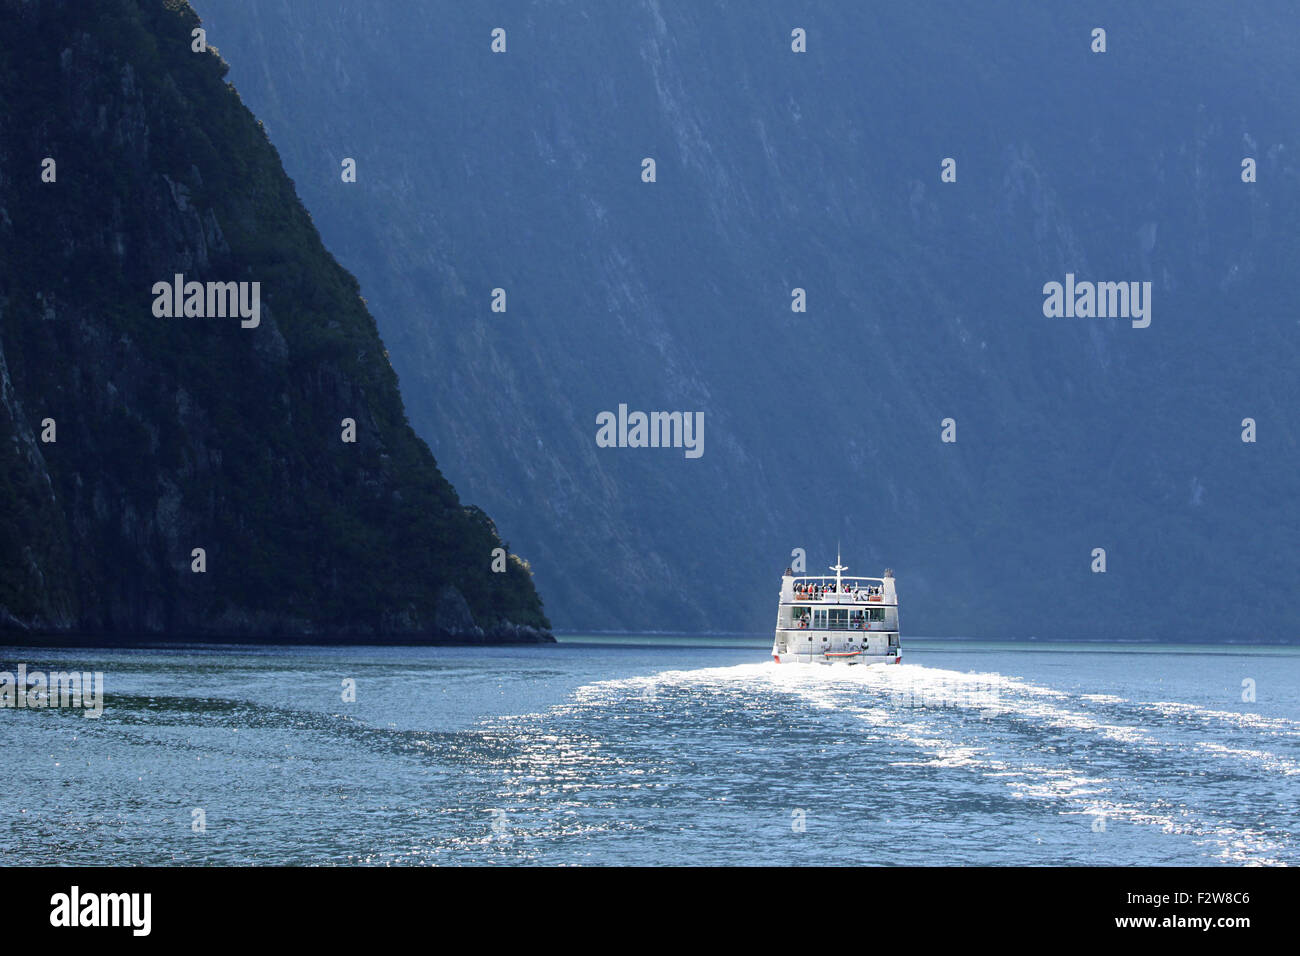 Sightseeing boat sailing in Milford Sound, New Zealand. Stock Photo